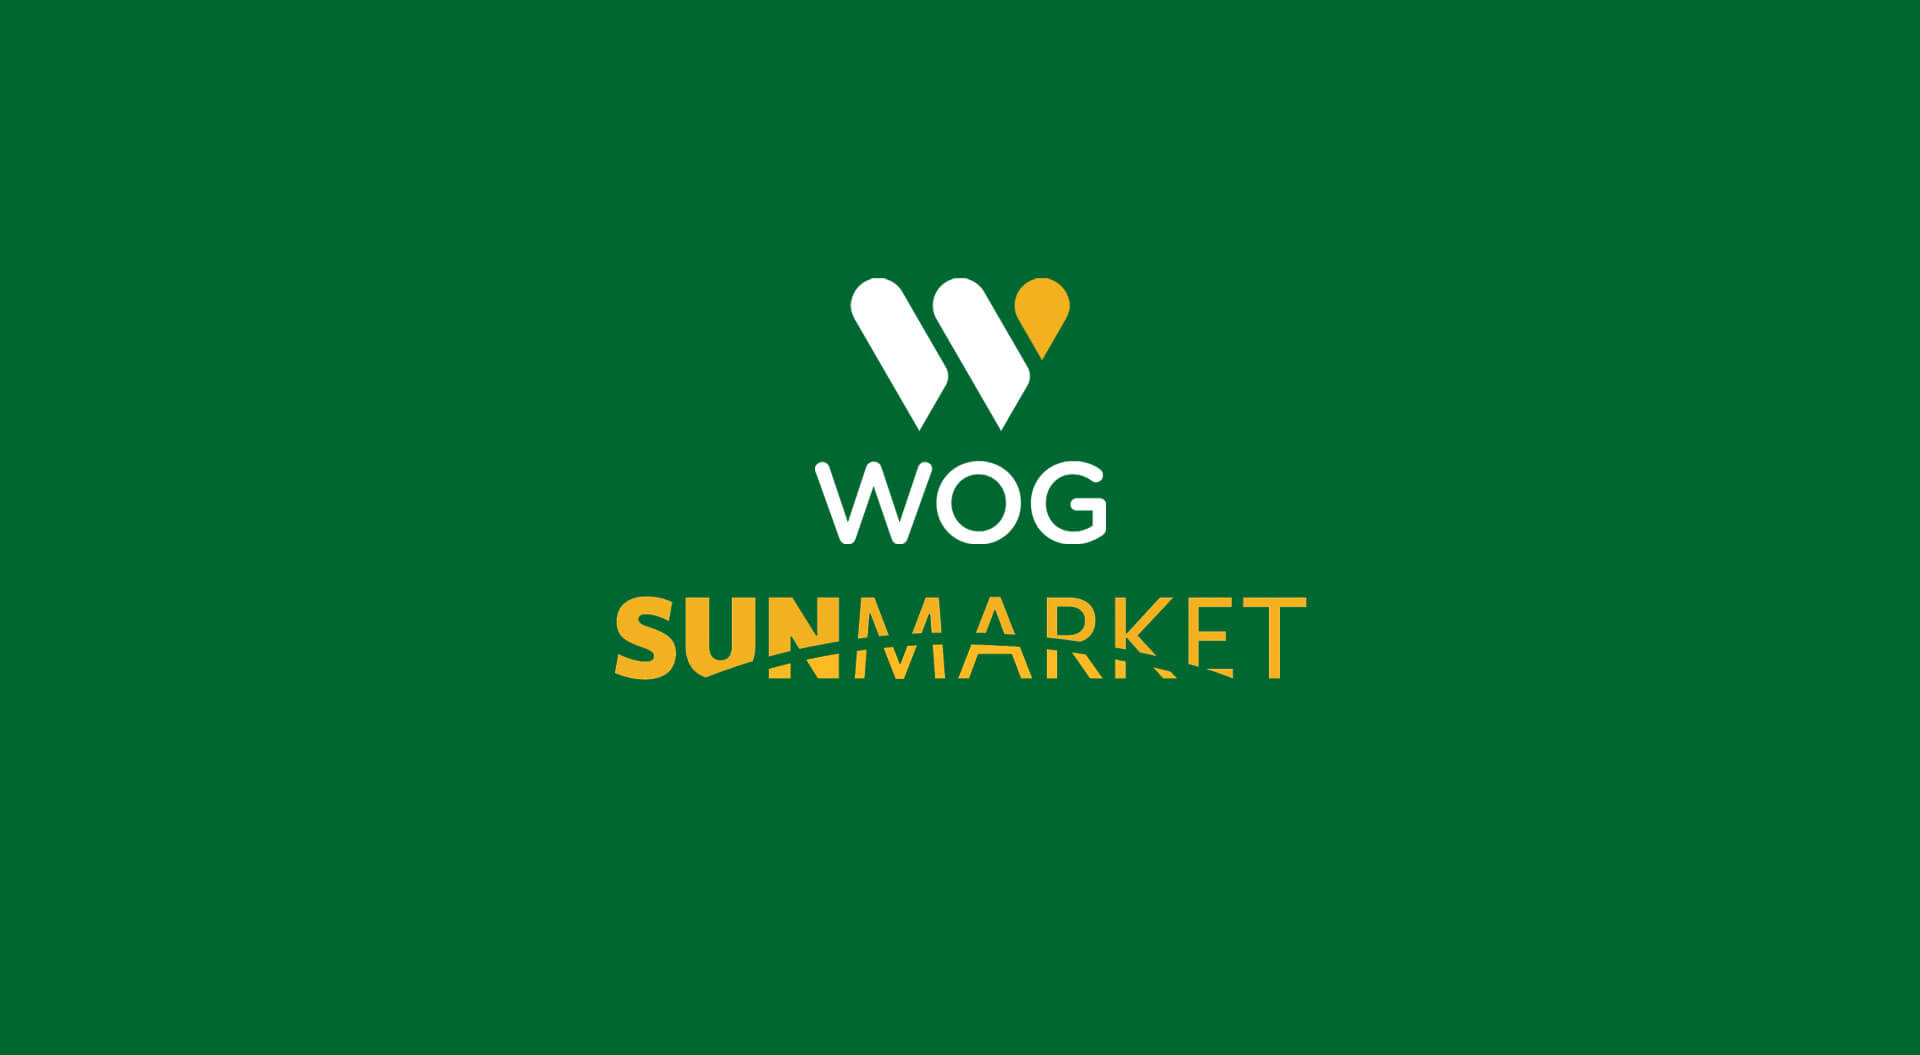 Petrol forecourt branding, design, retail, filling stations, convenience stores, brand identity, marketing strategies, concept ideas, innovation, inspiring, future trends, new - WOG, Western Oil Group Ukraine